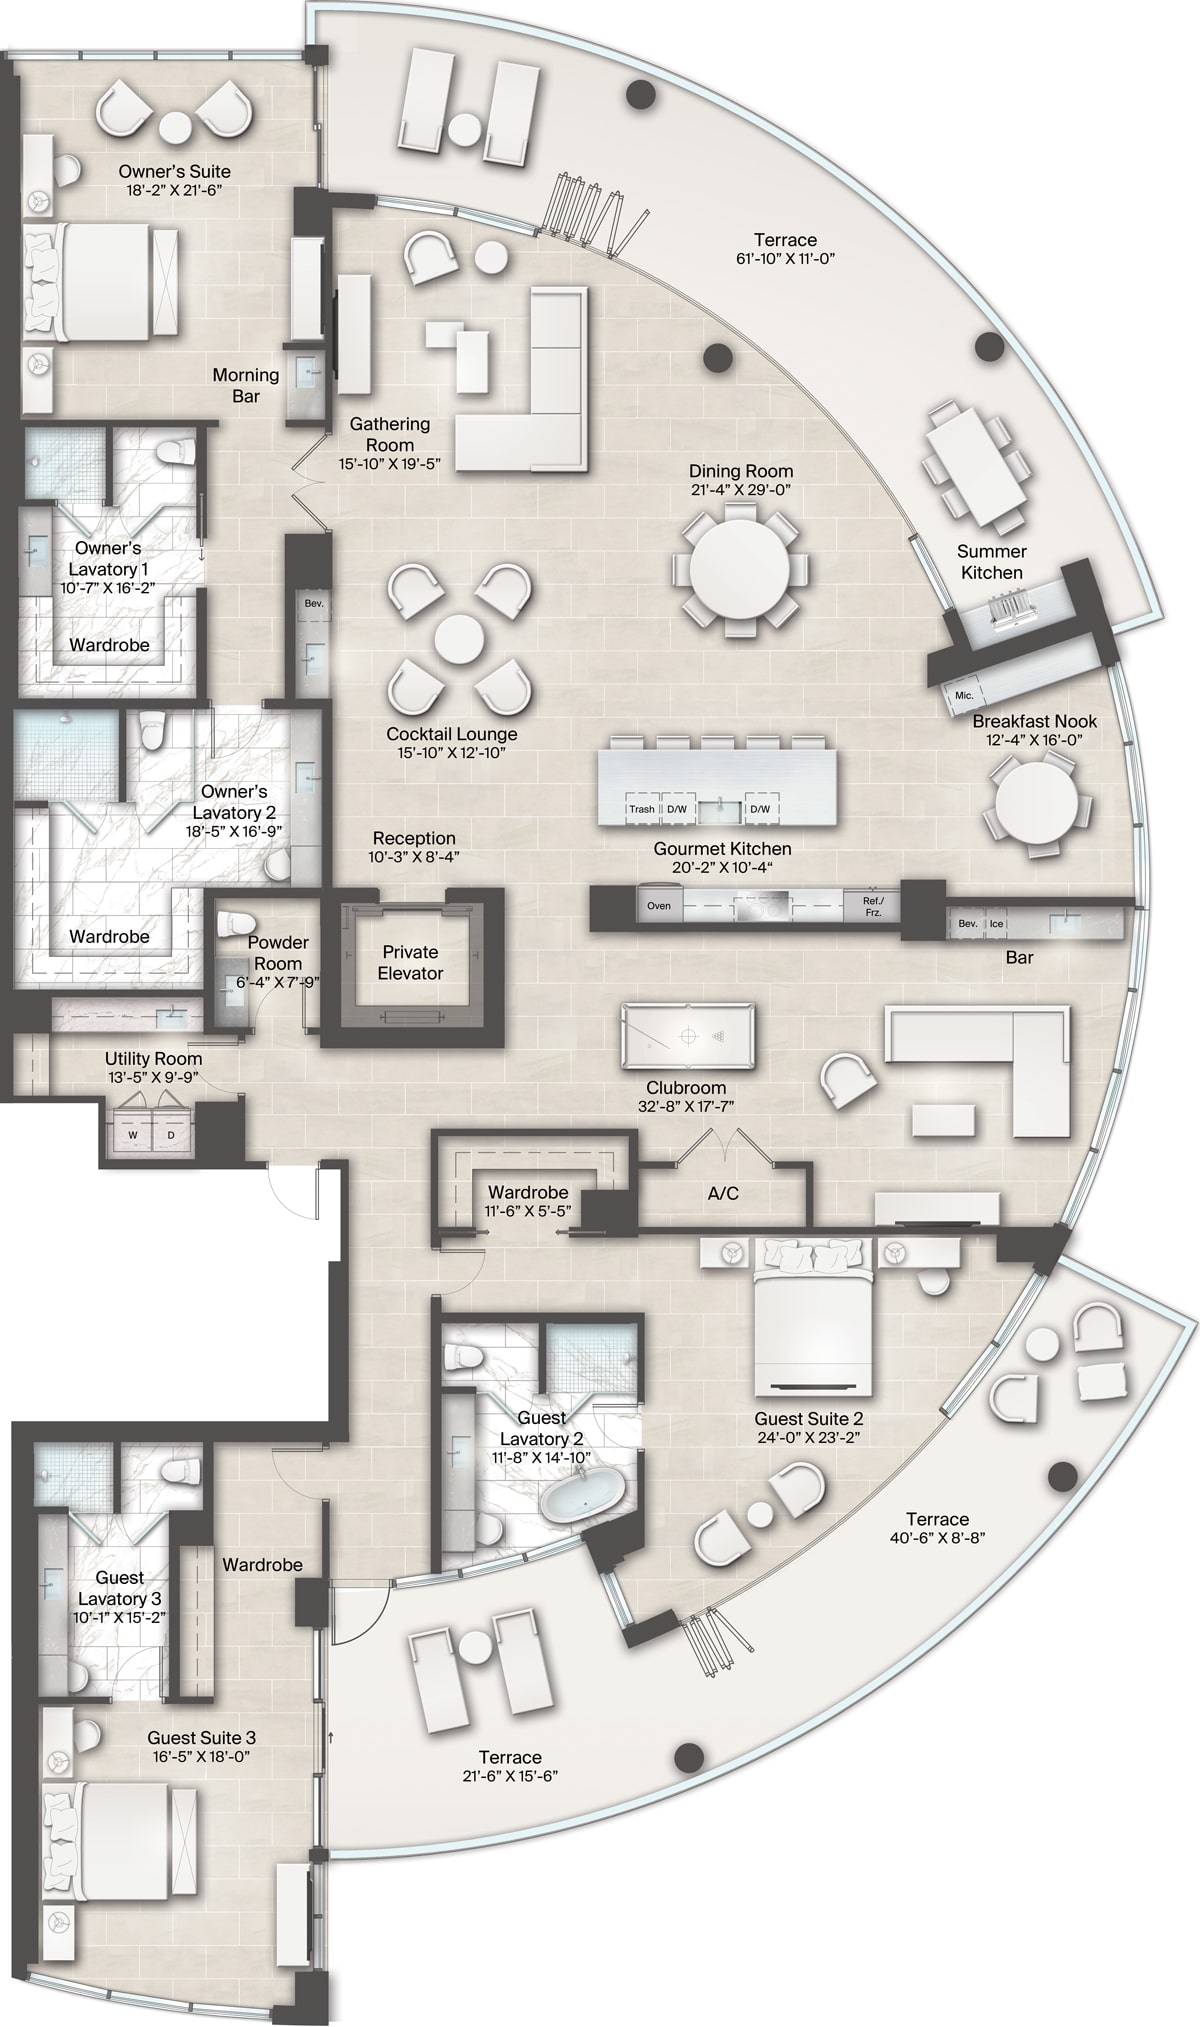 Armand Building, Plan 4 Floorplan includes 3 bedrooms, 4.5 baths, clubroom and one large wrap around terrace